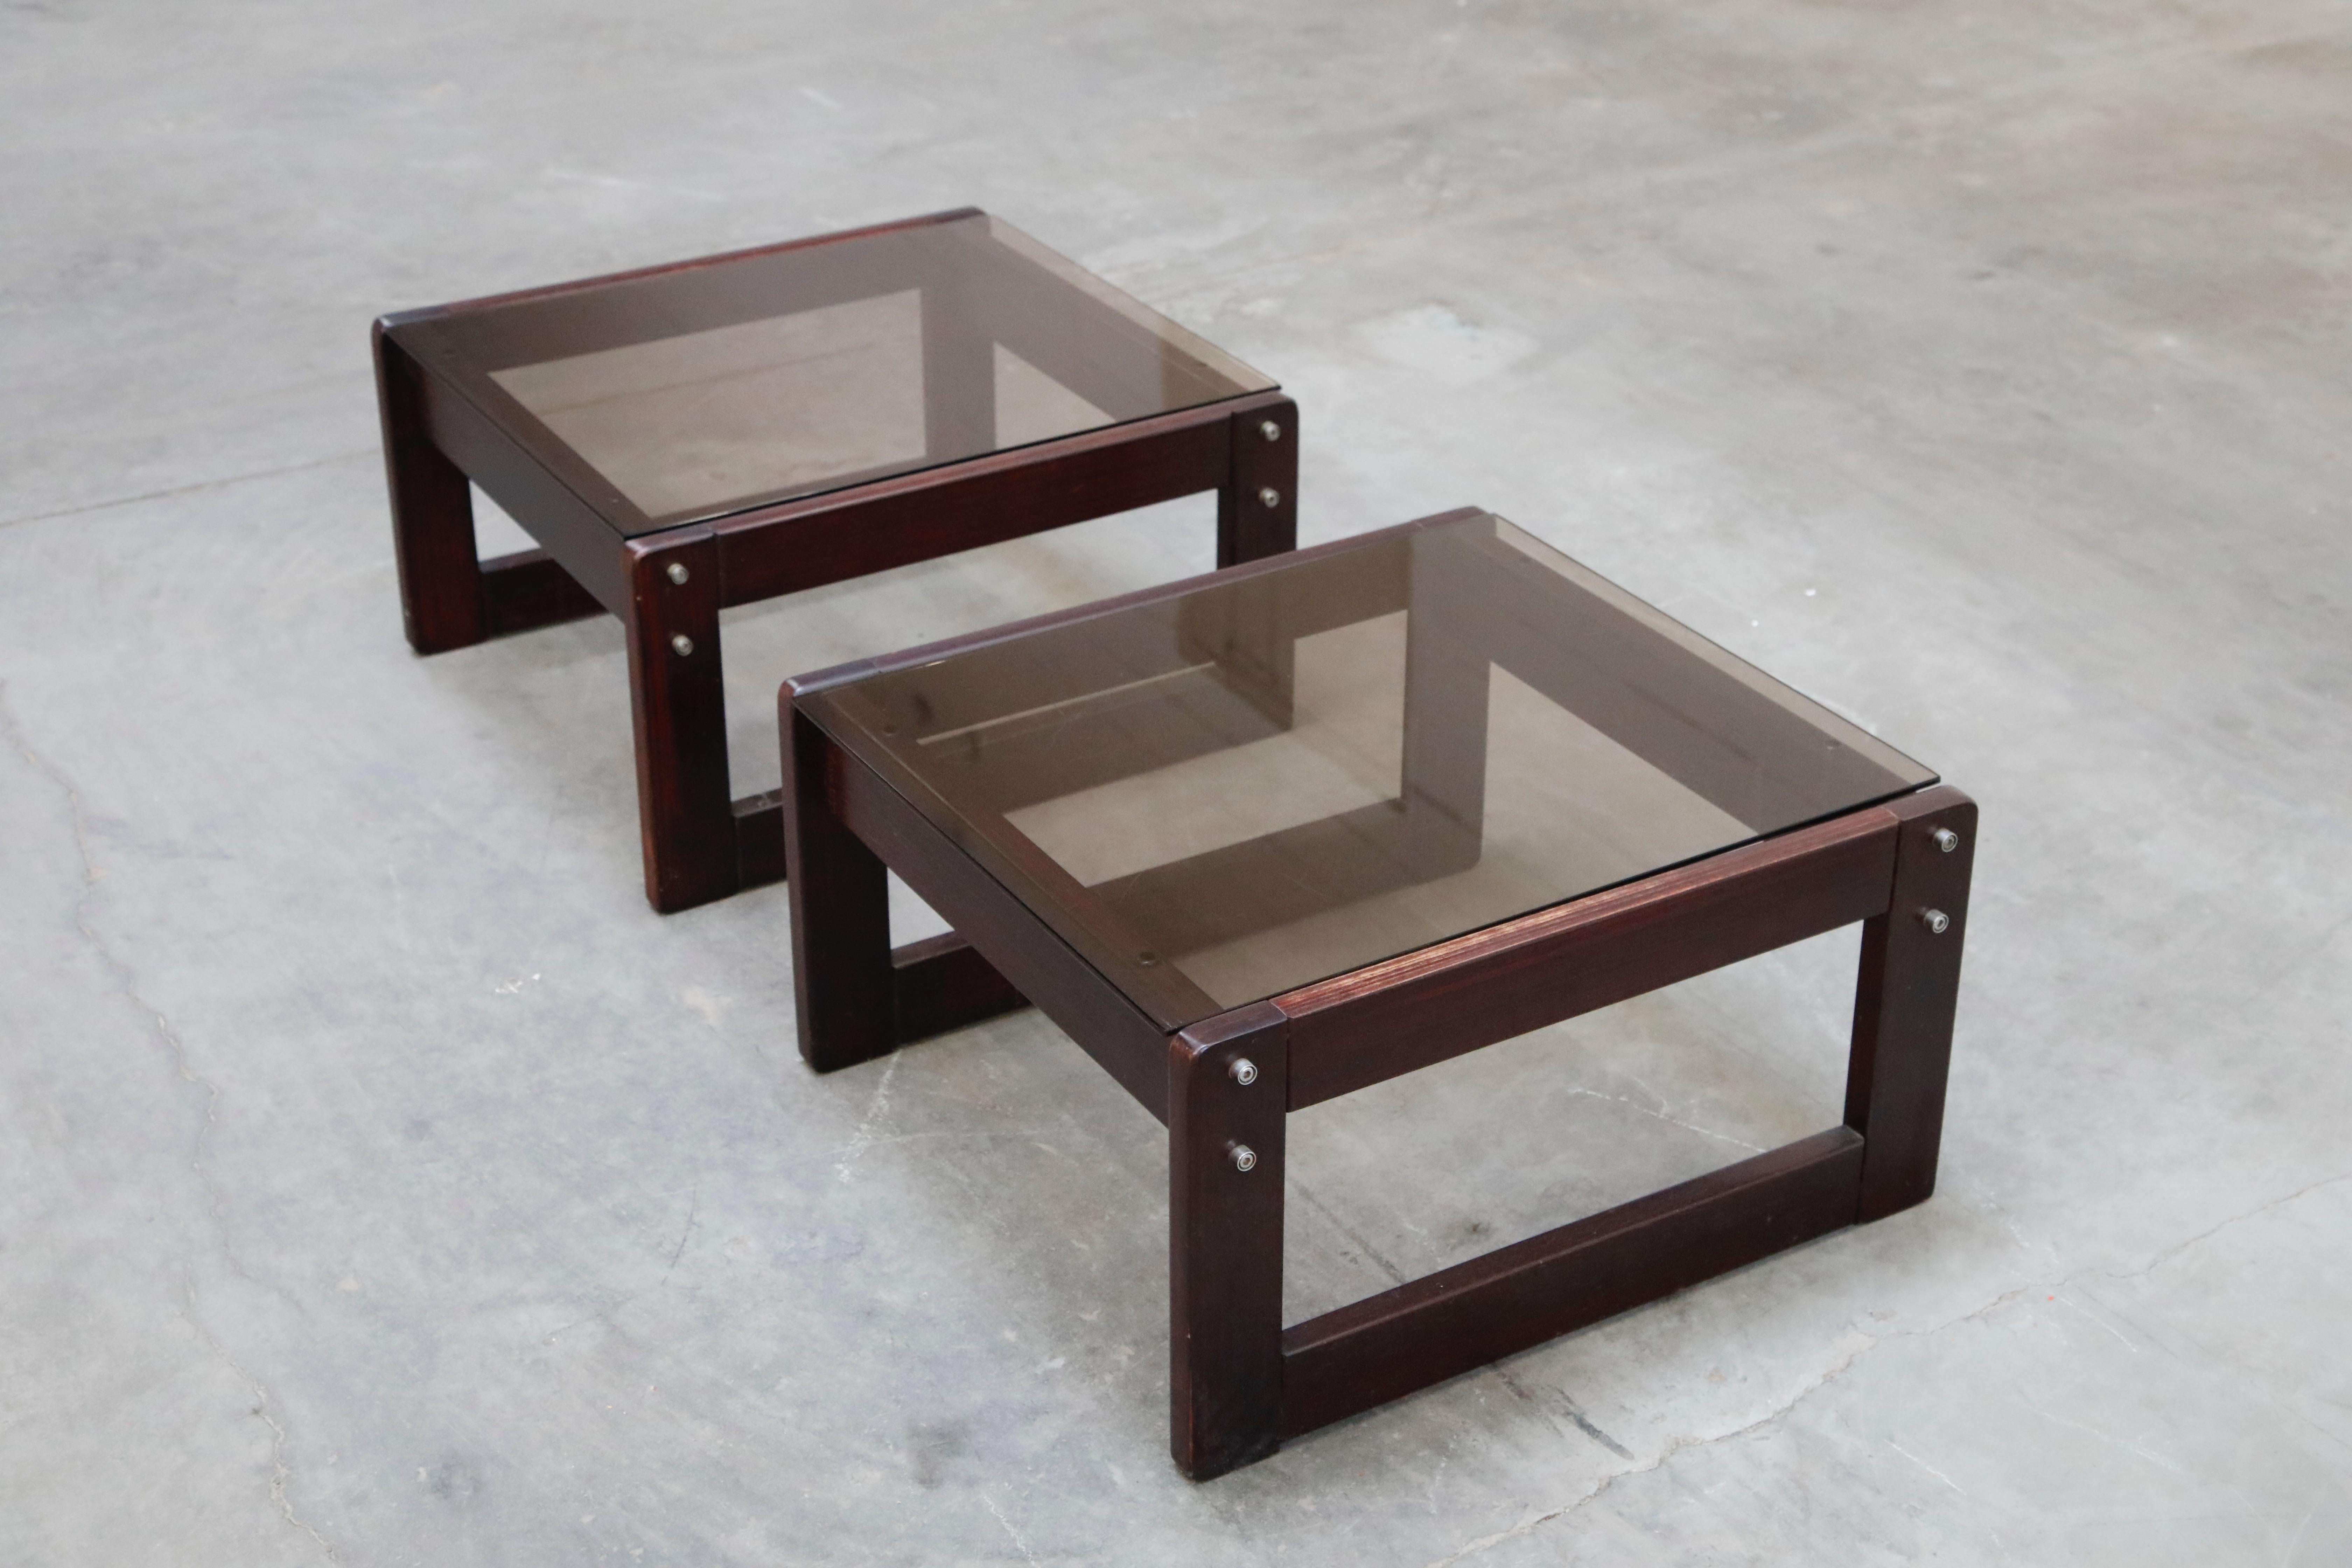 A fantastic pair of beautiful Brazilian rosewood and smoked glass side tables by coveted designer Percival Lafer. These 1960s end tables were made in Brazil and are a favorite amongst collectors, designers, artists and galleries. As rosewood is now